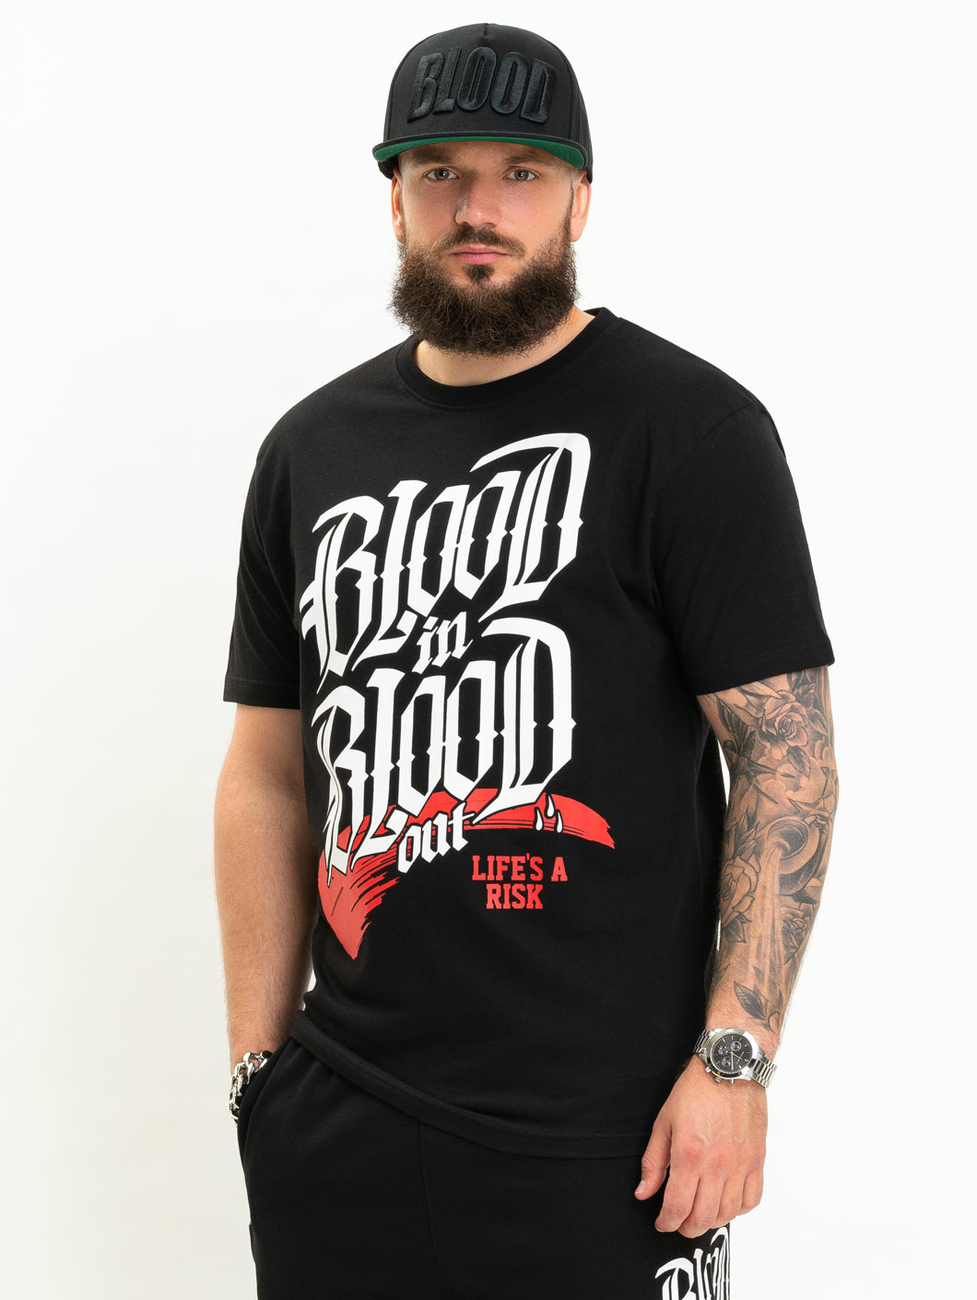 Blood In Blood Out Tranjeros T-Shirt L